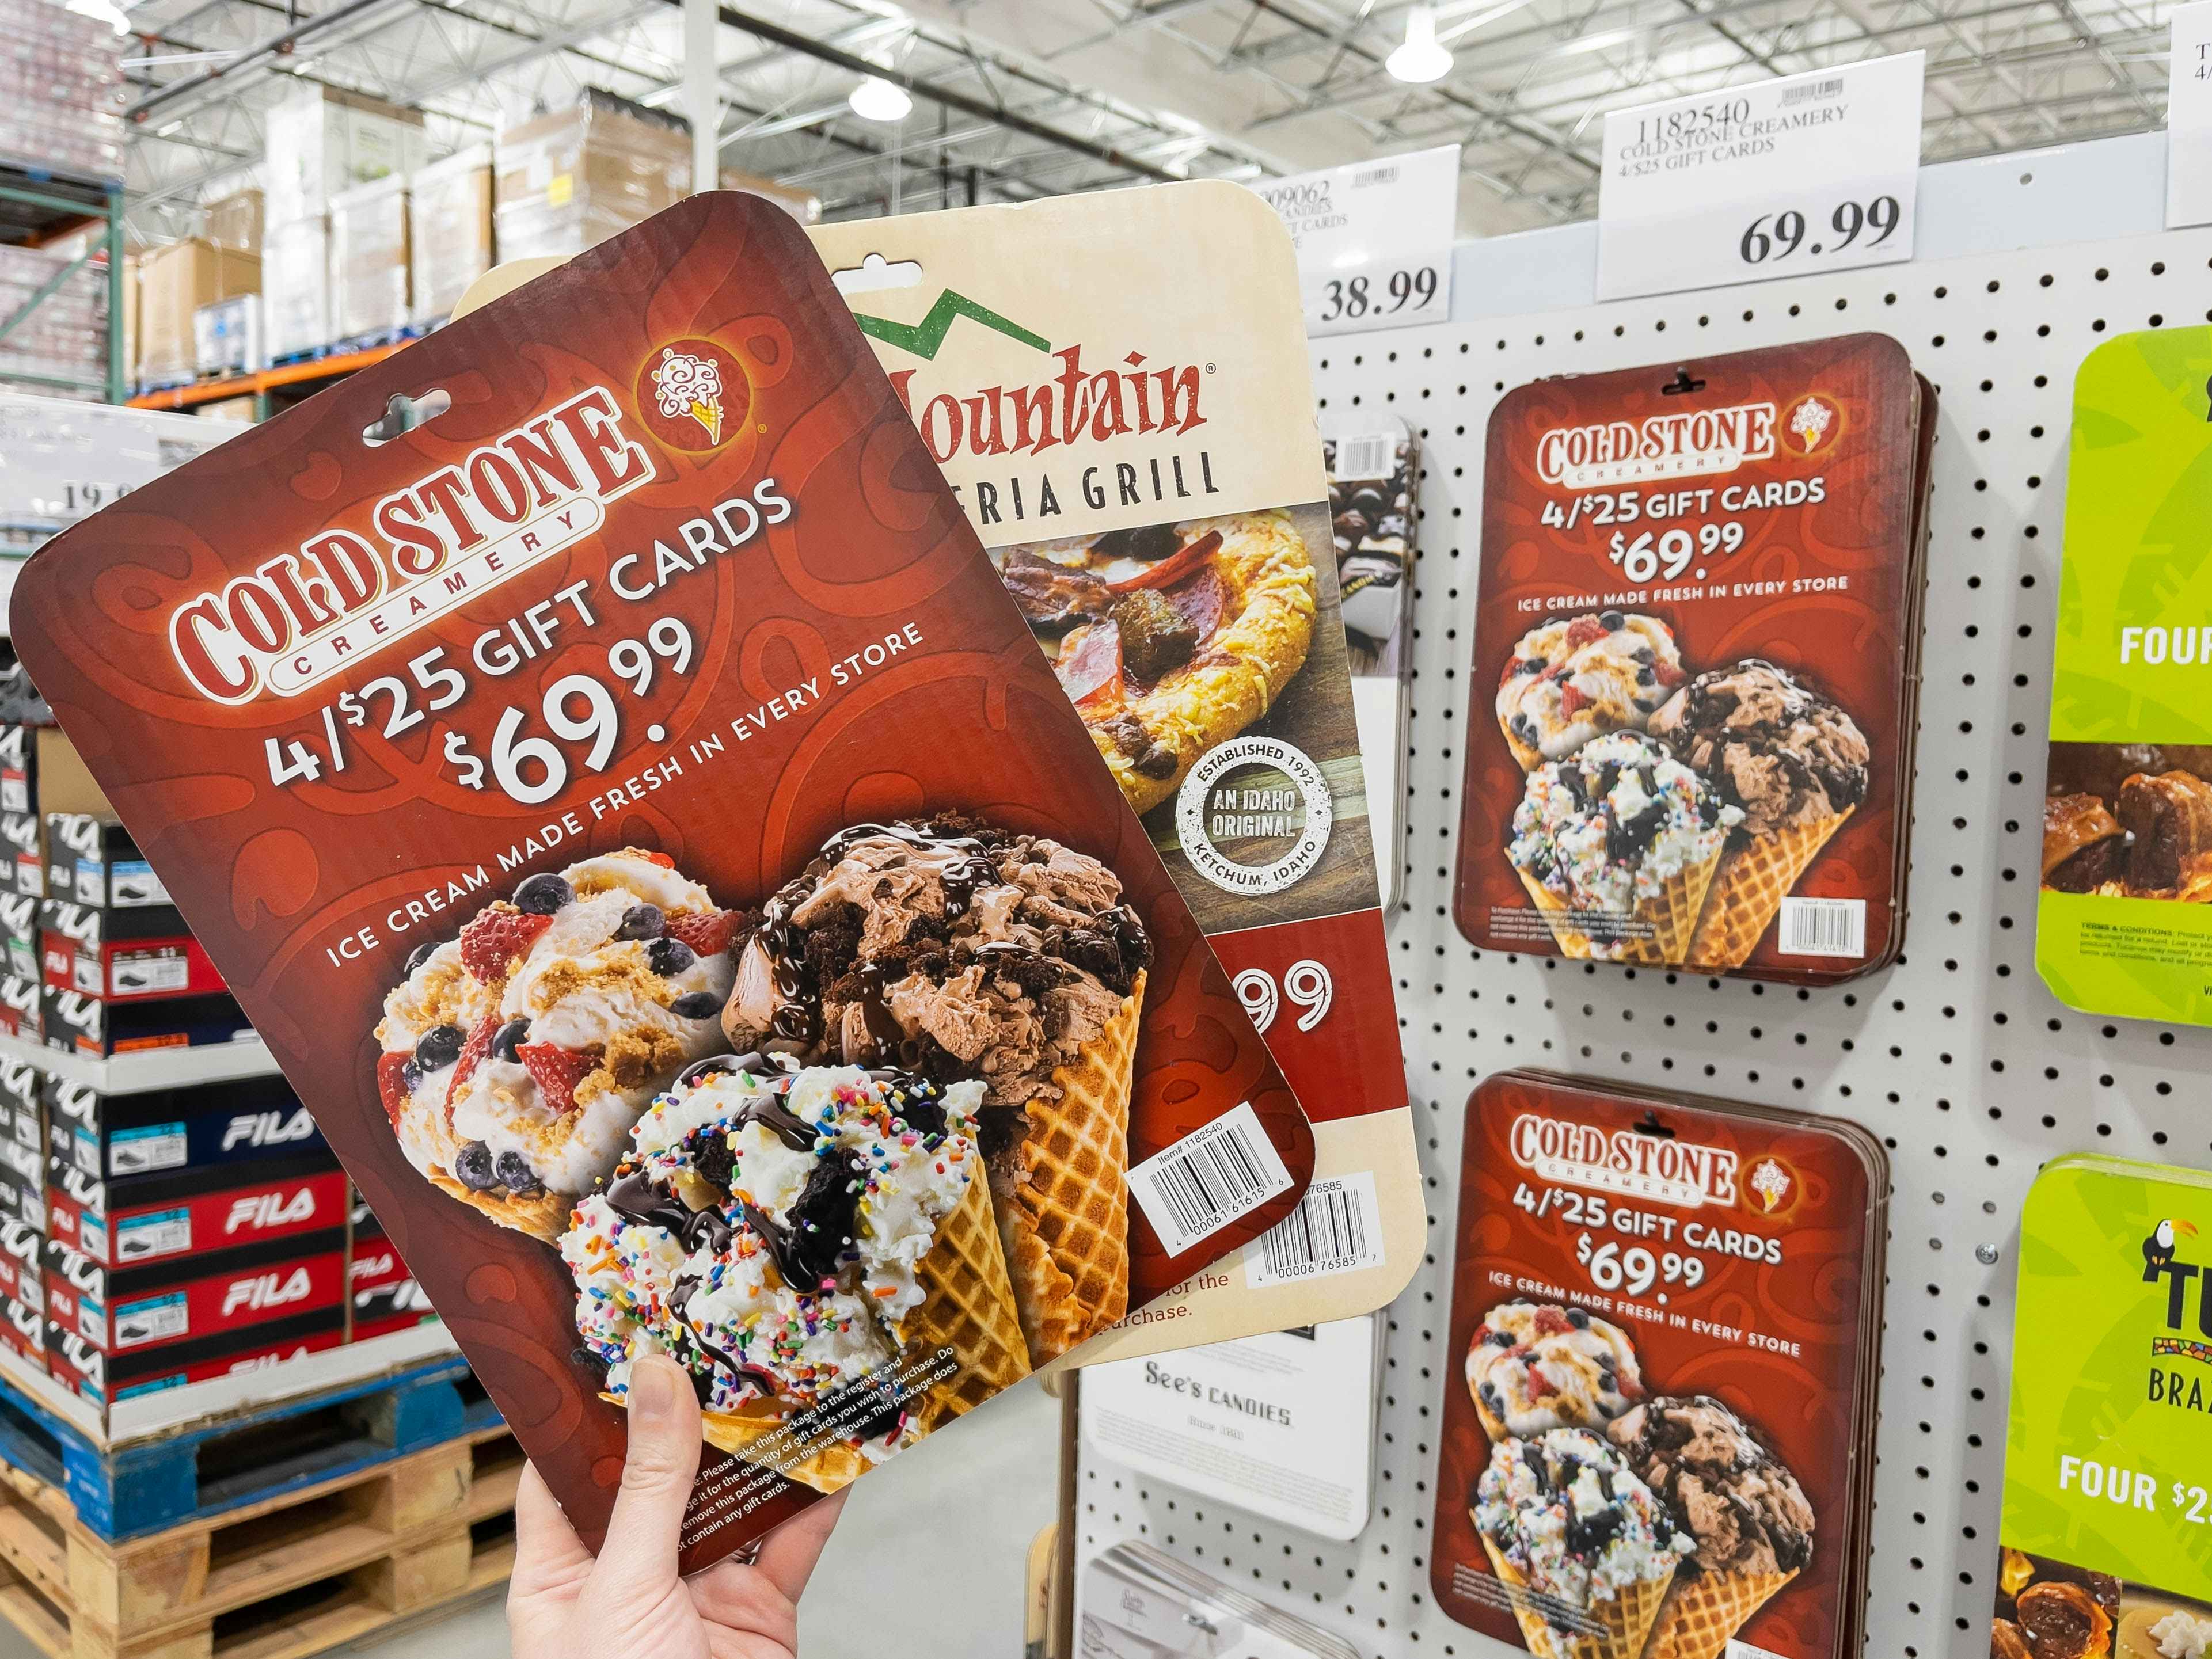 A person holding up two cardboard display cutouts for gift cards sold at Costco. One of the cards is for 4, $25 Cold Stone Creamery gift cards for $69.99